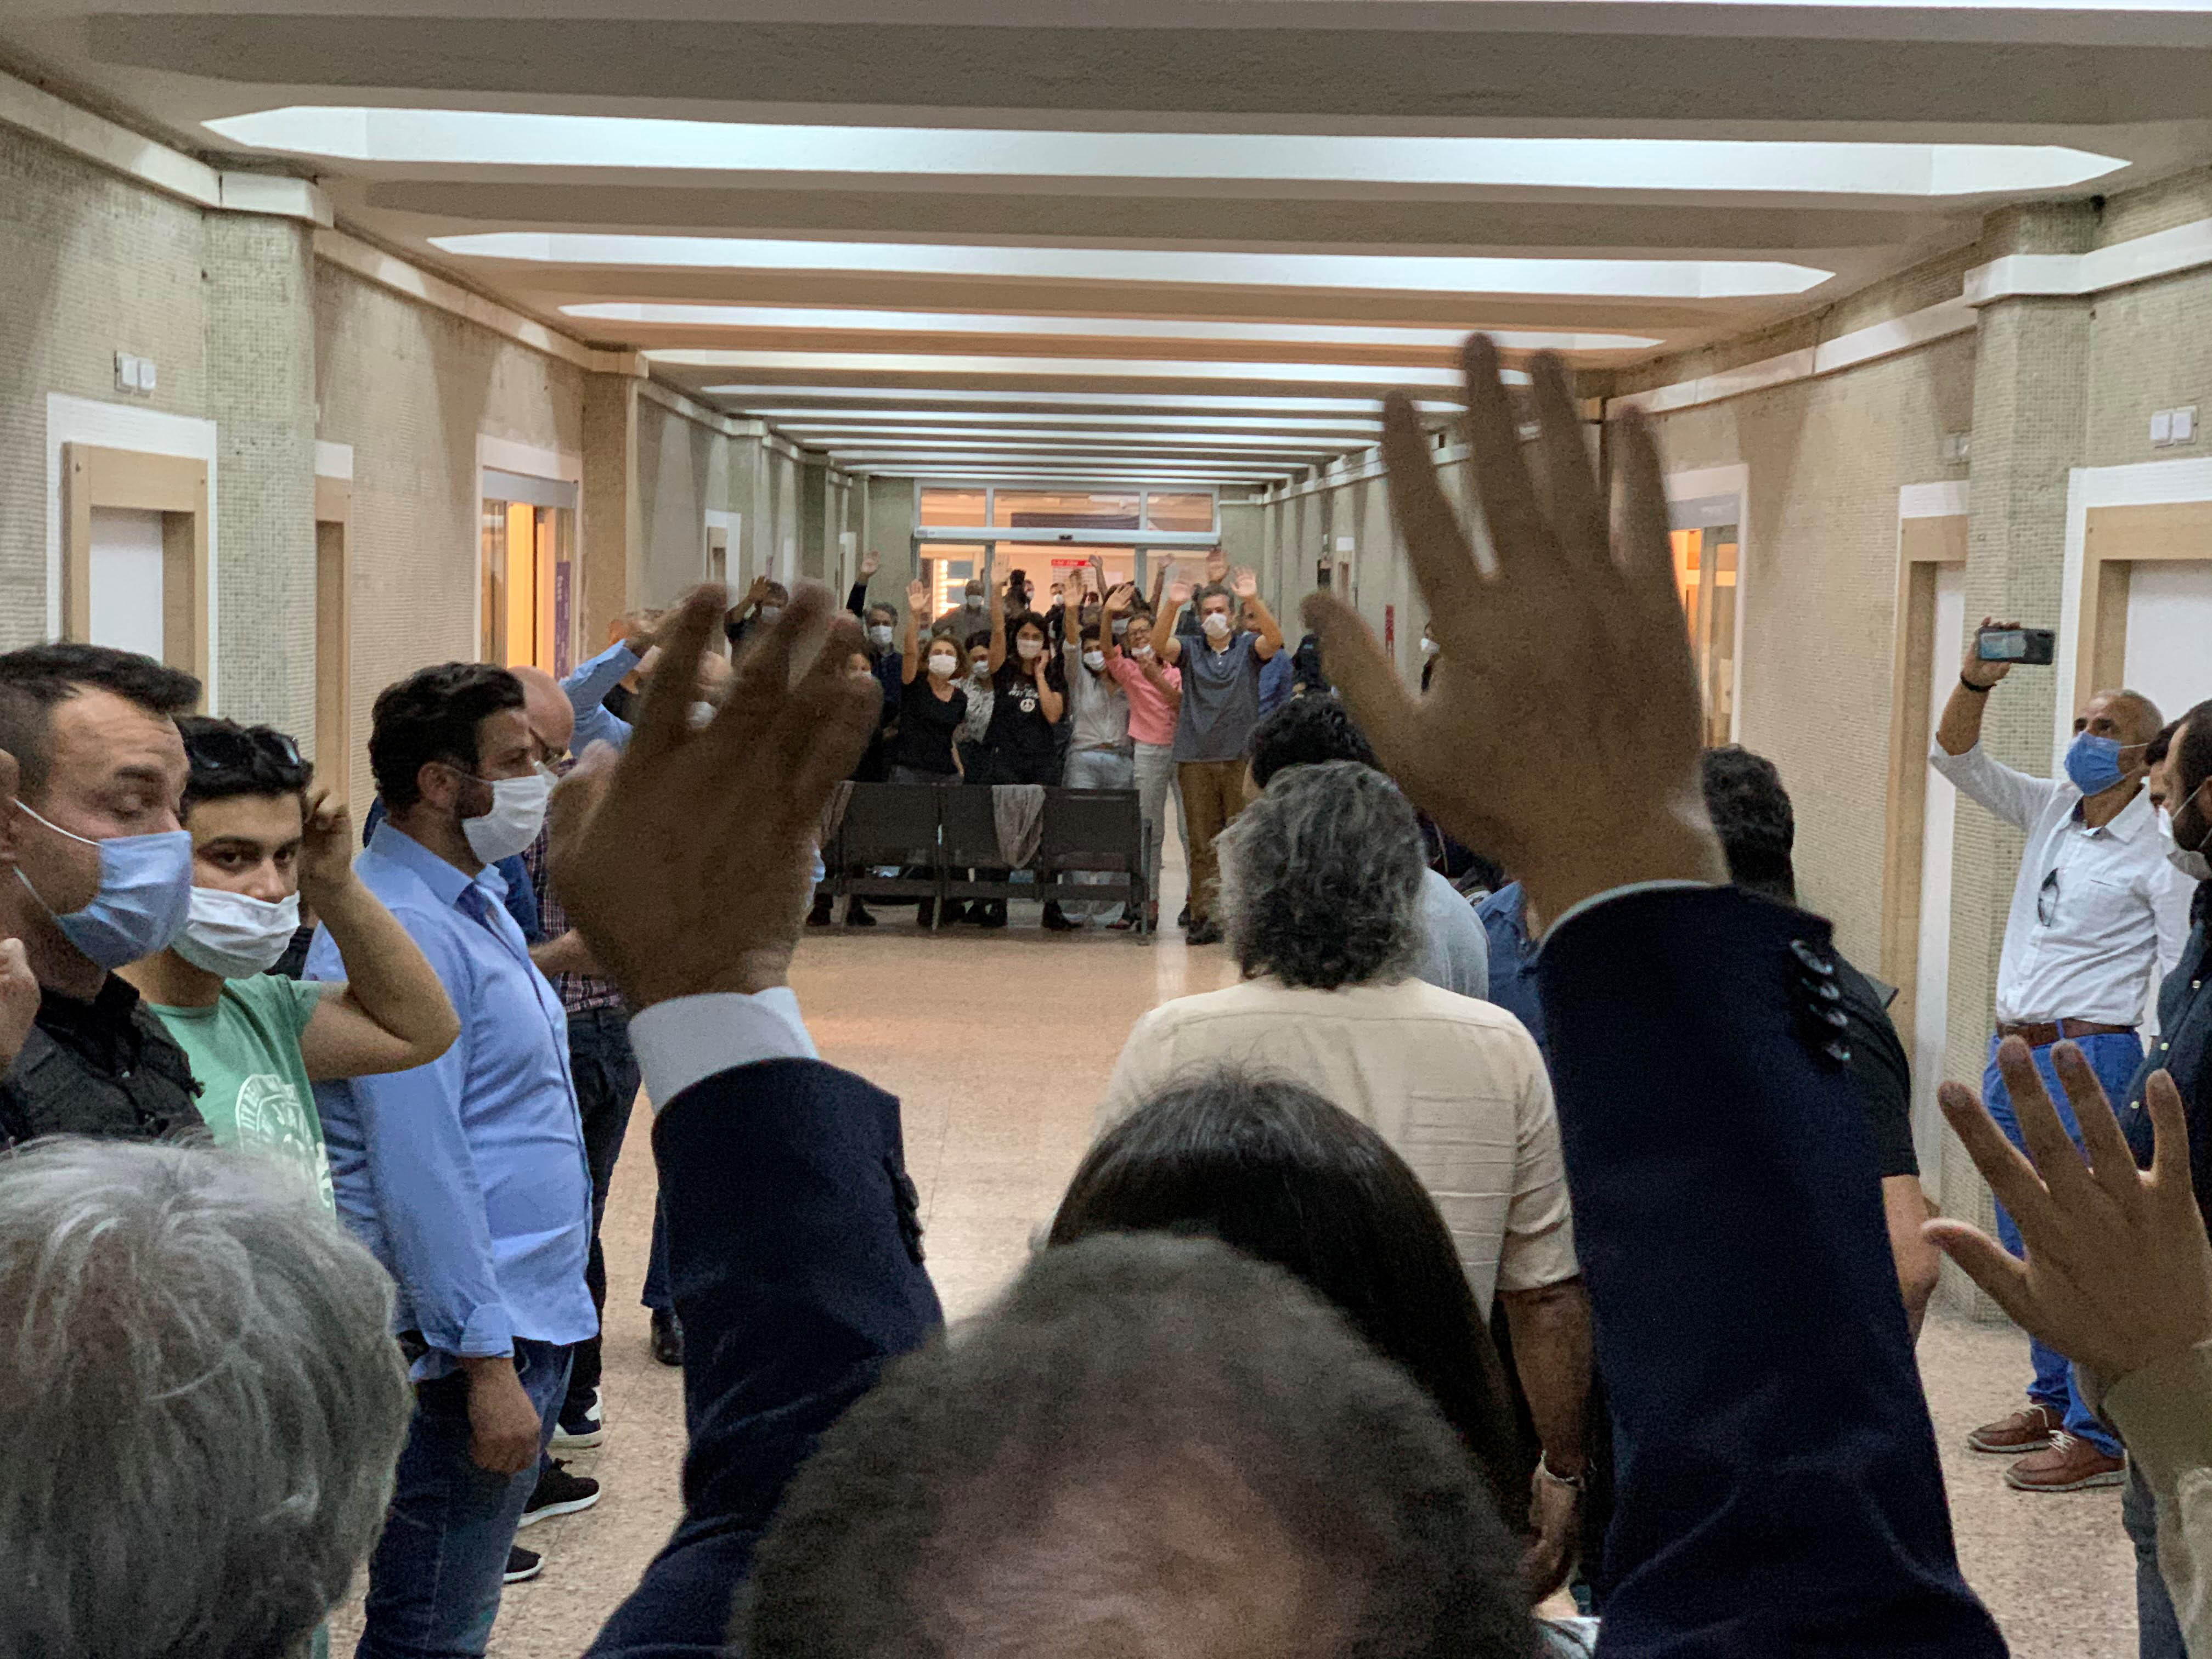 In the corridors of Ankara courthouse, lawyers and MPs wave to Peoples’ Democratic Party politicians and officials waiting to testify before a court. Ankara, October 1, 2020.